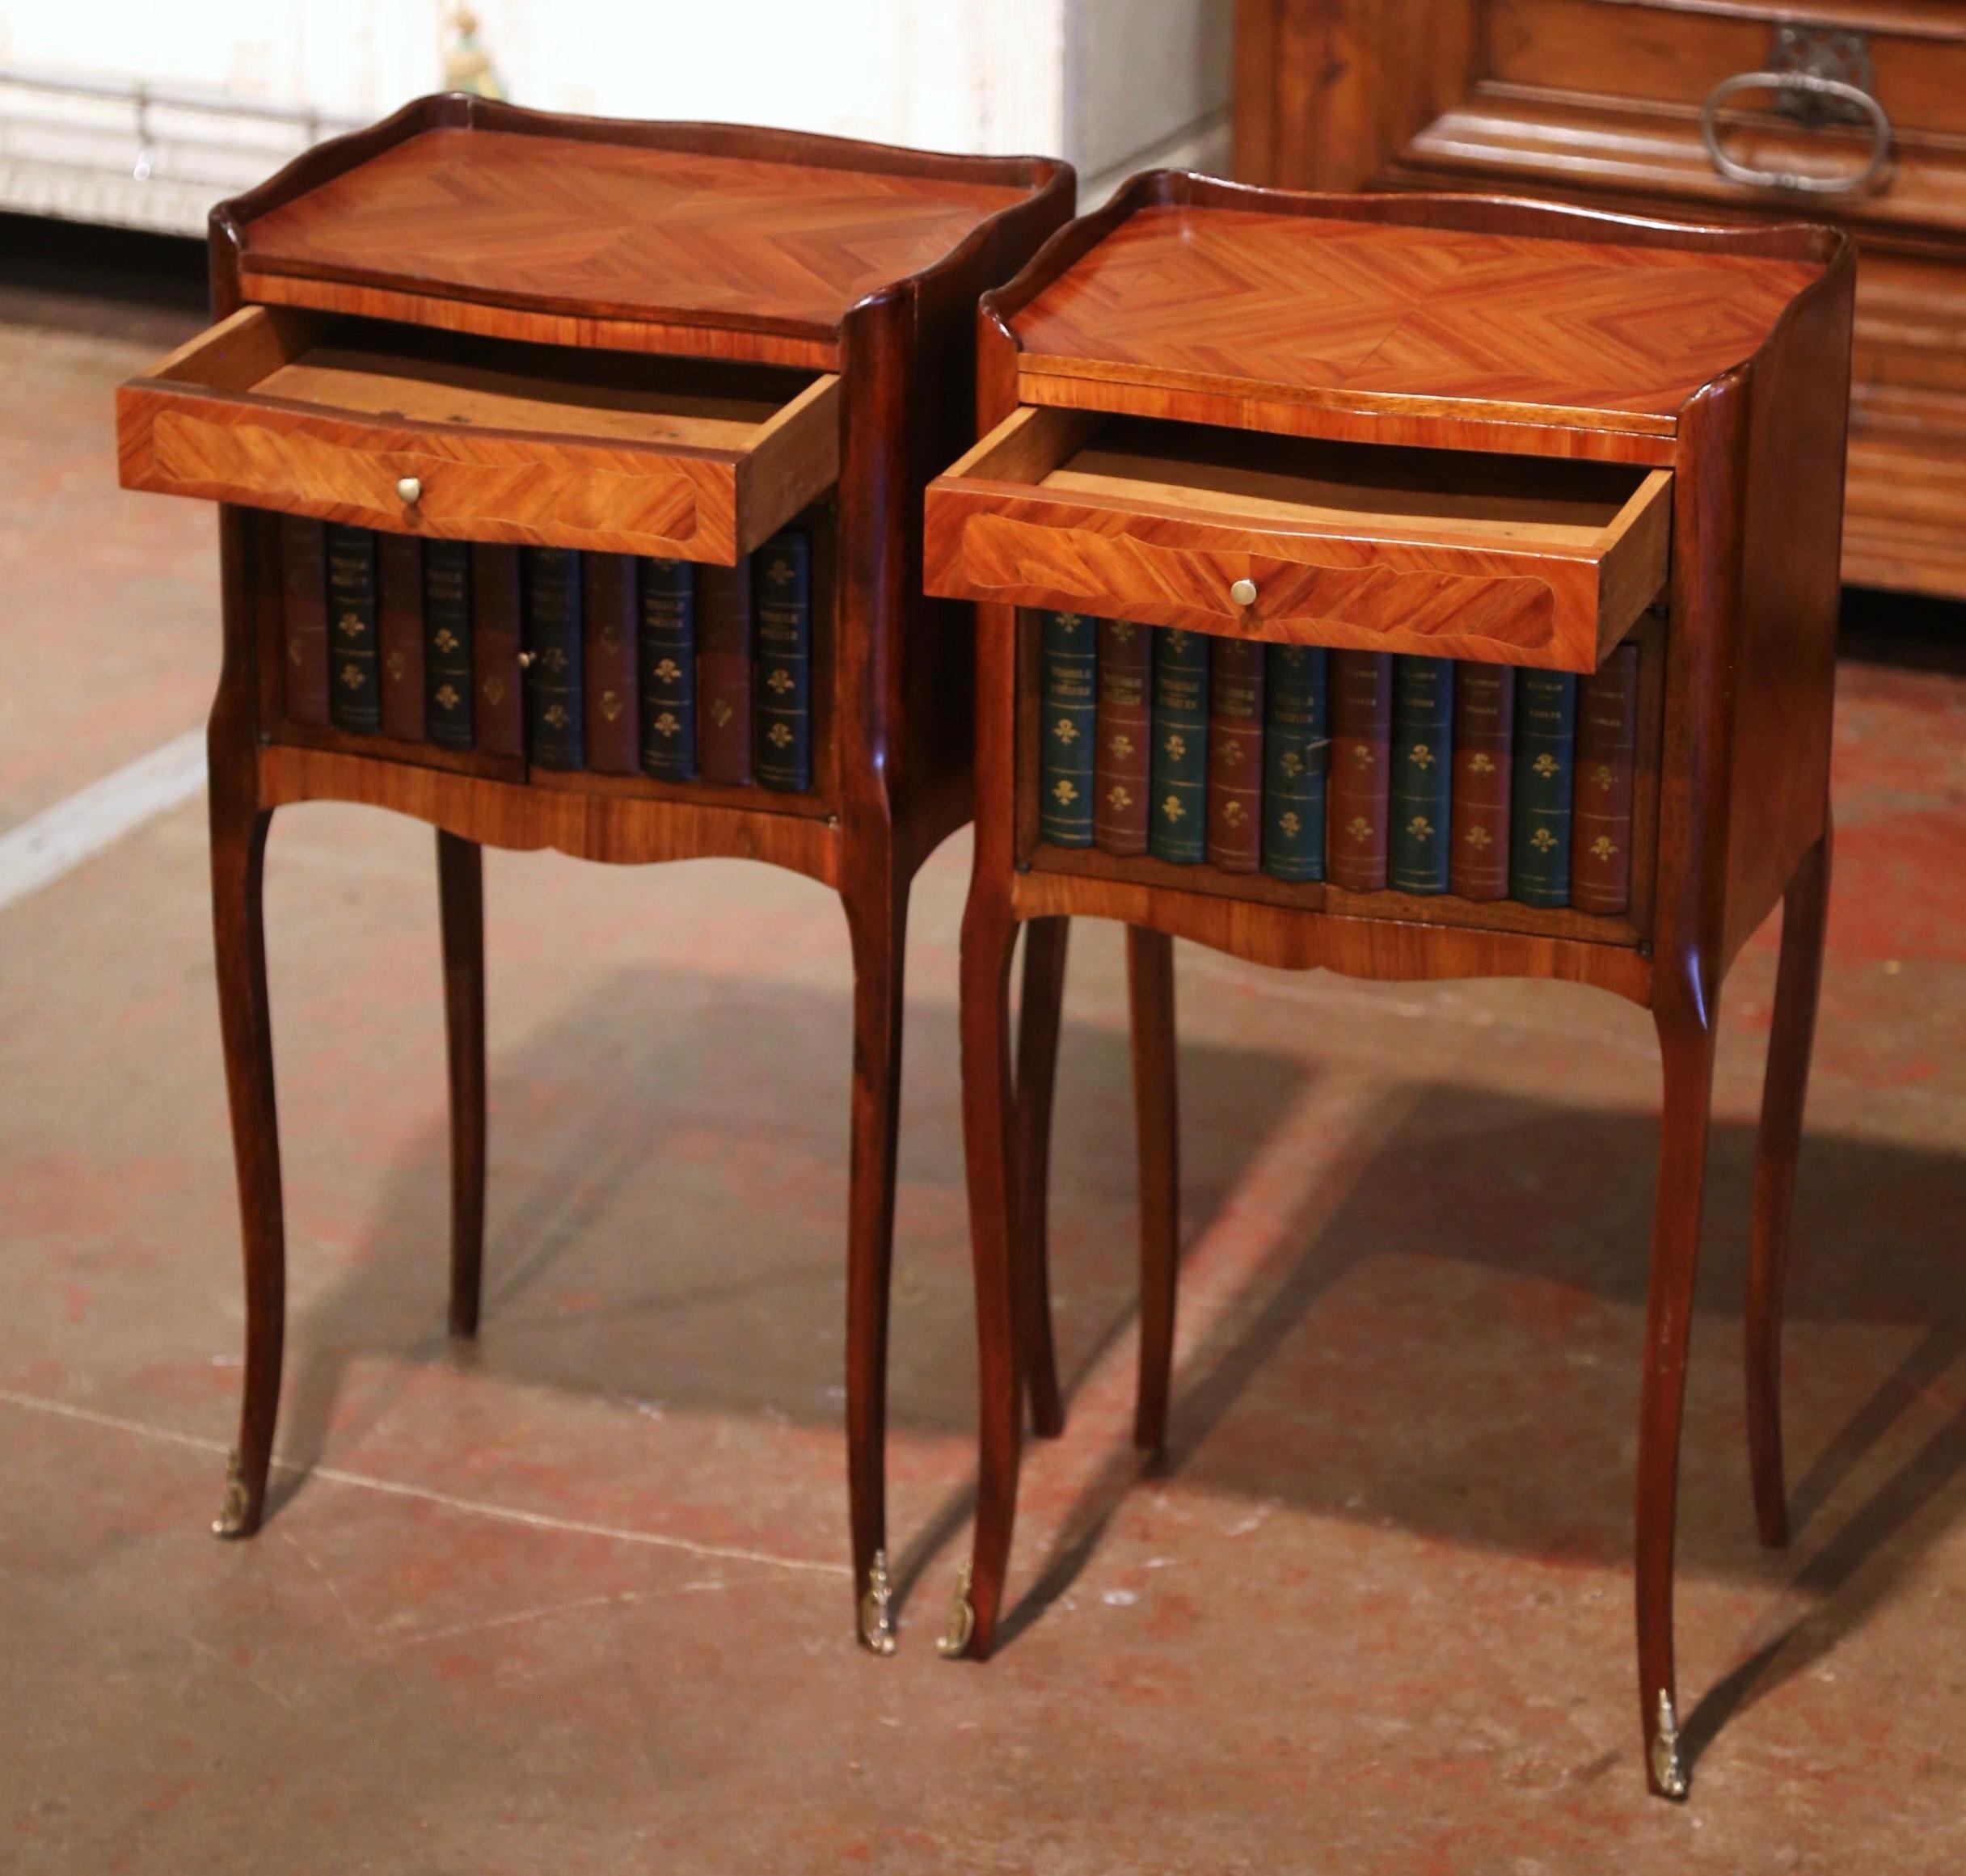 Pair of 19th Century French Walnut Nightstands with Leather Book Spine Doors For Sale 6